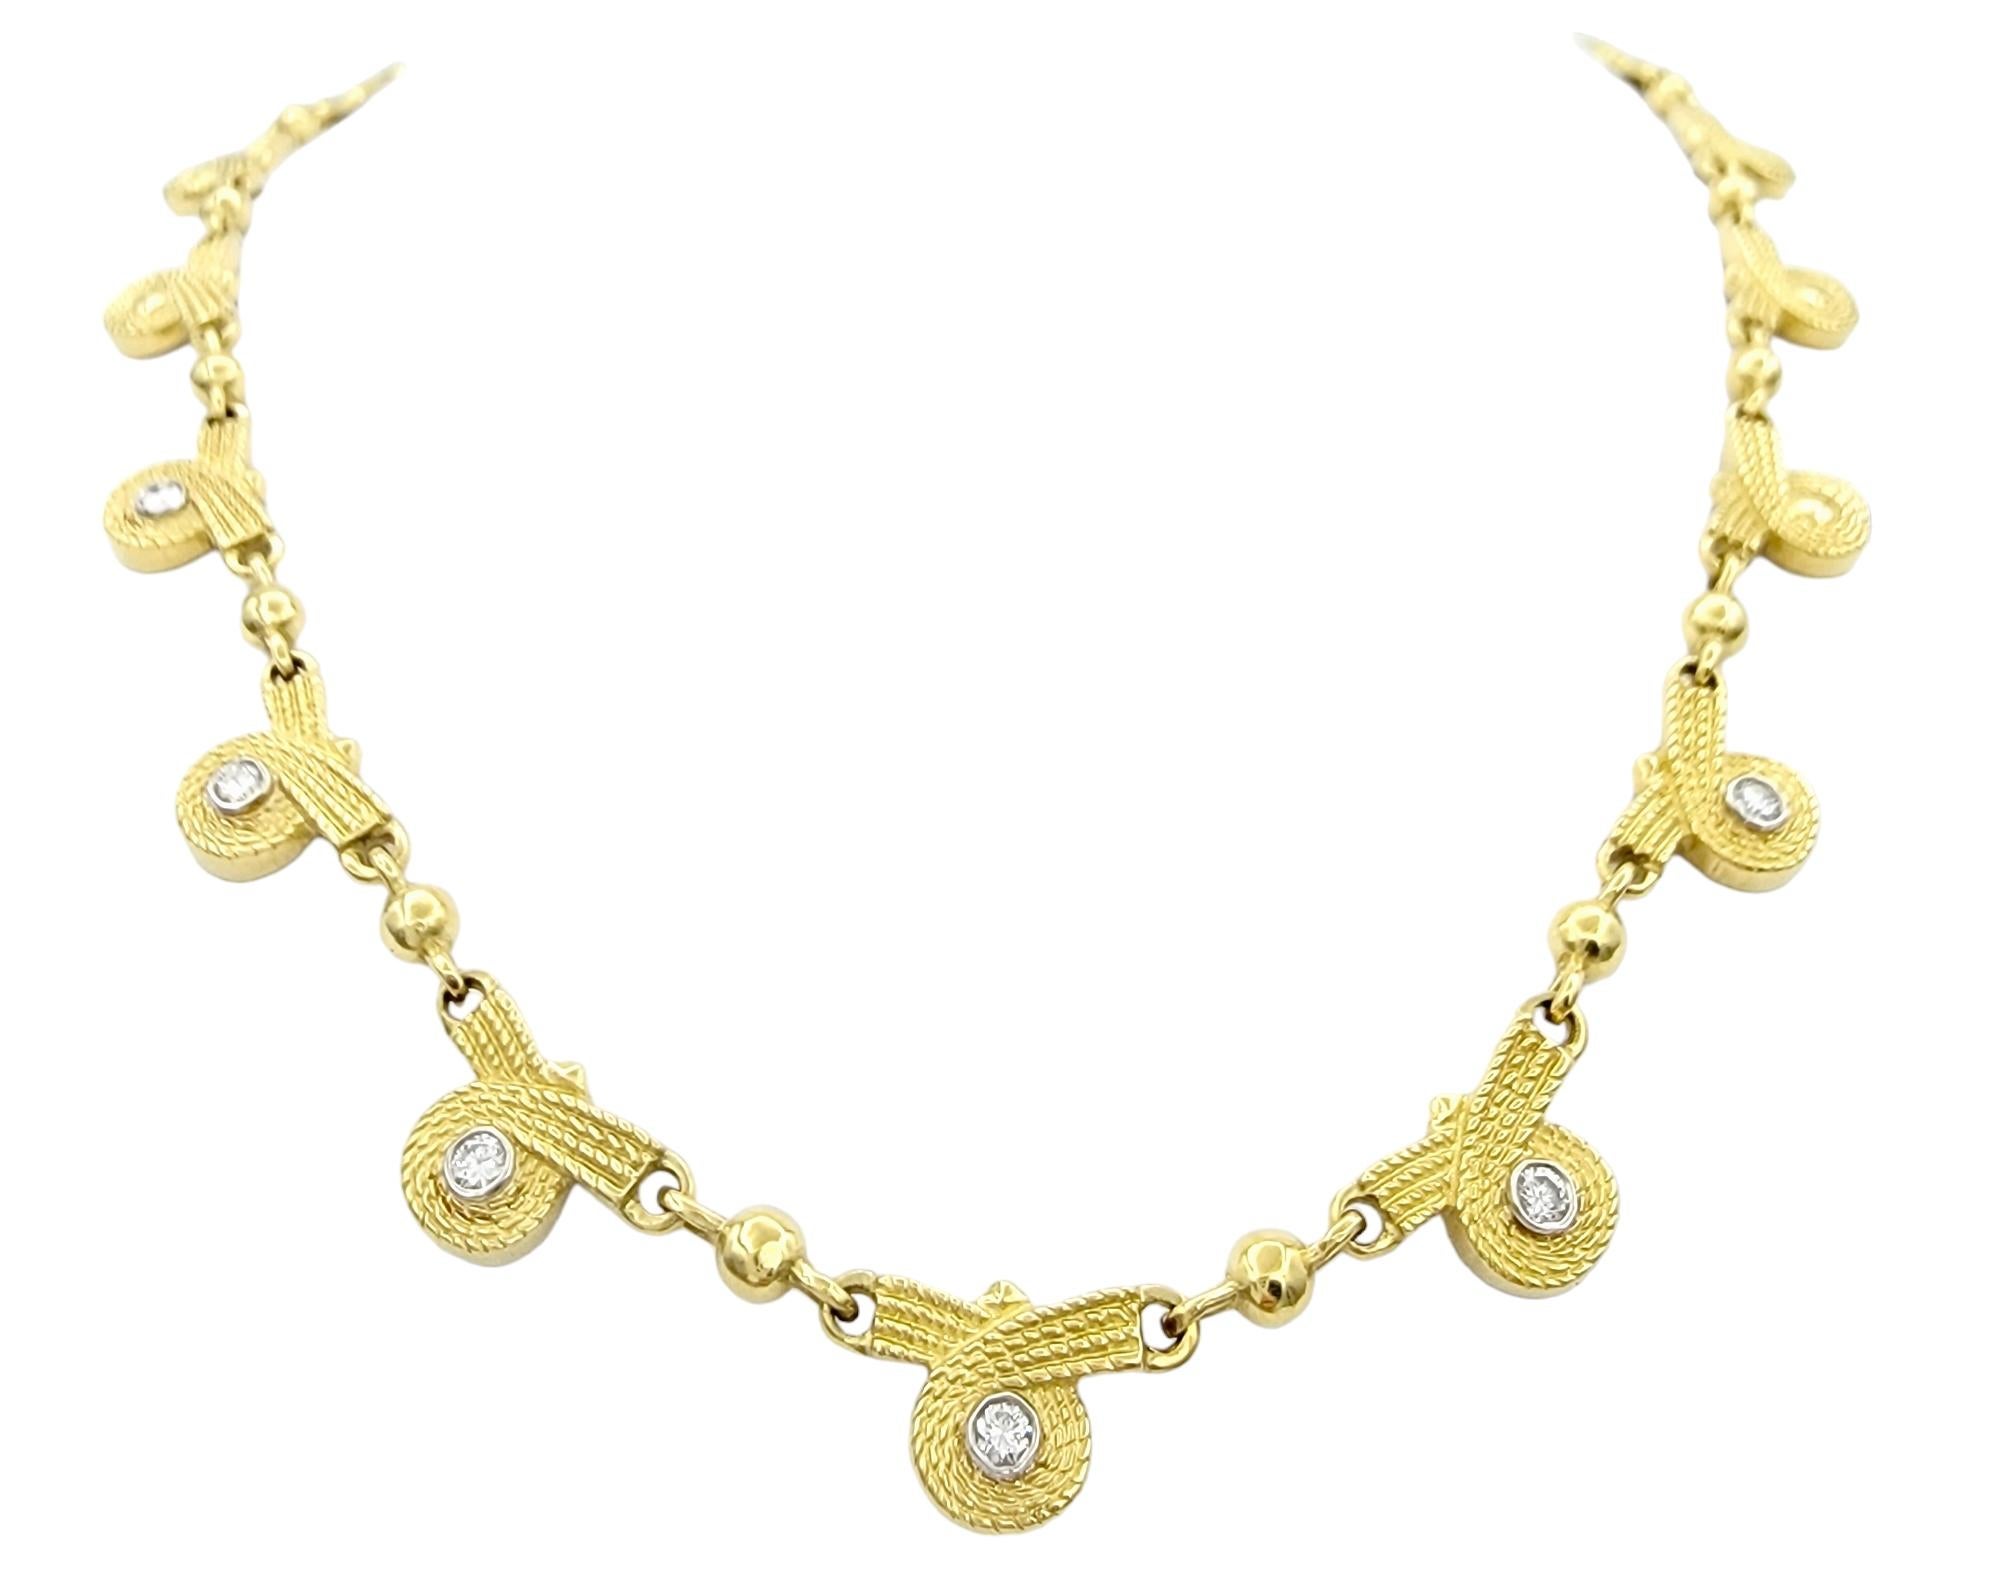 This exquisite 18 karat gold link necklace is a true testament to craftsmanship and creativity, designed by jewelry artist JJ Marco in their trademarked 